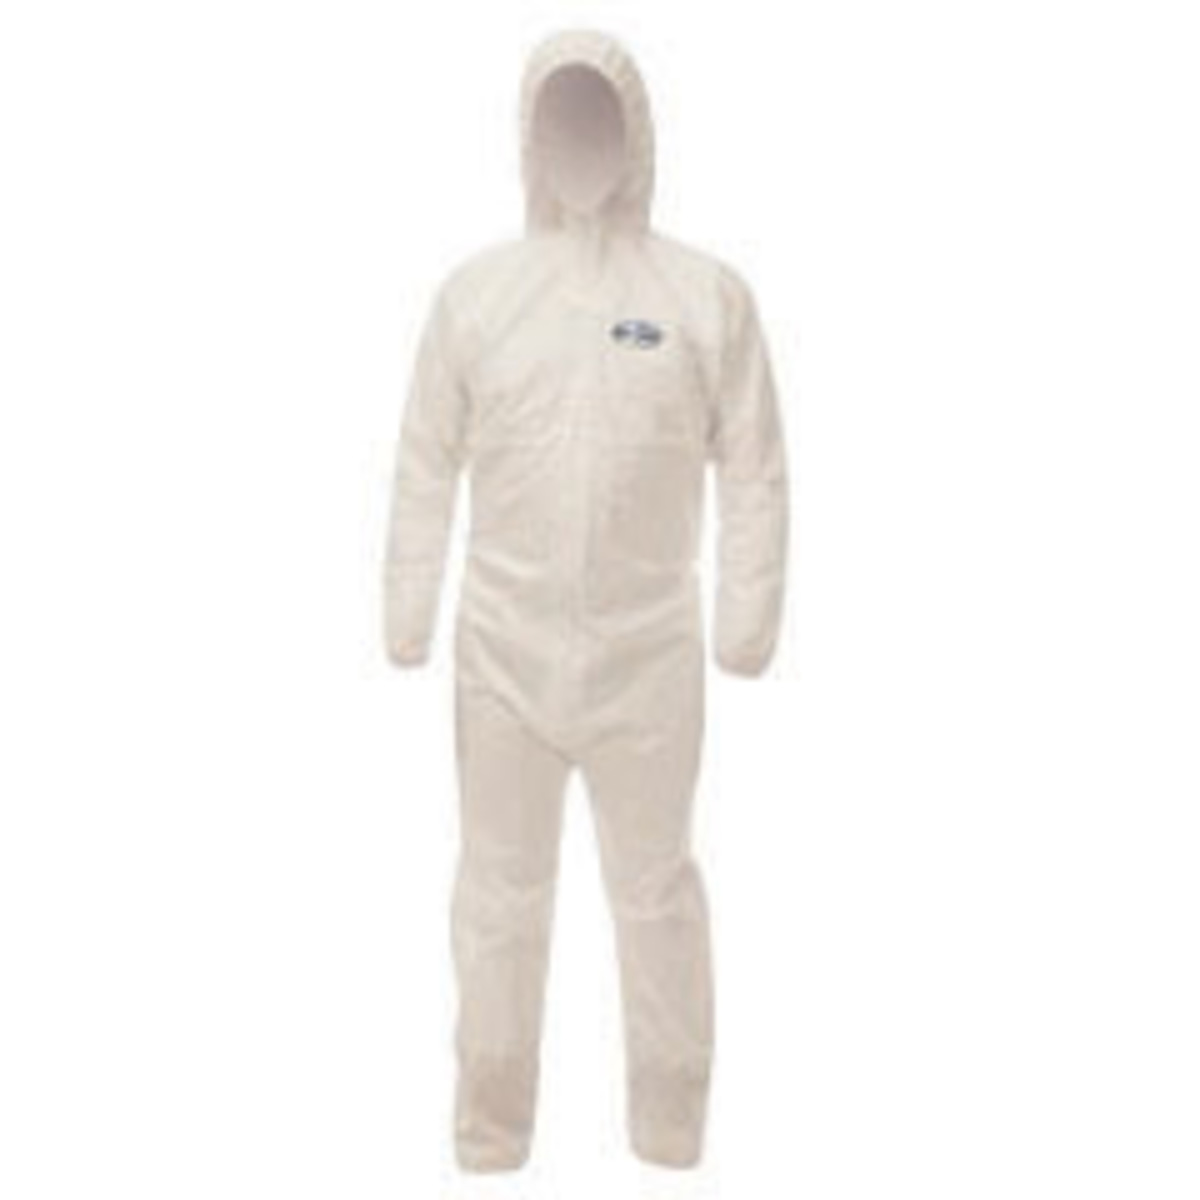 Kimberly-Clark Professional™ 2X White KleenGuard™ A20 SMMMS Disposable Coveralls (Availability restrictions apply.)